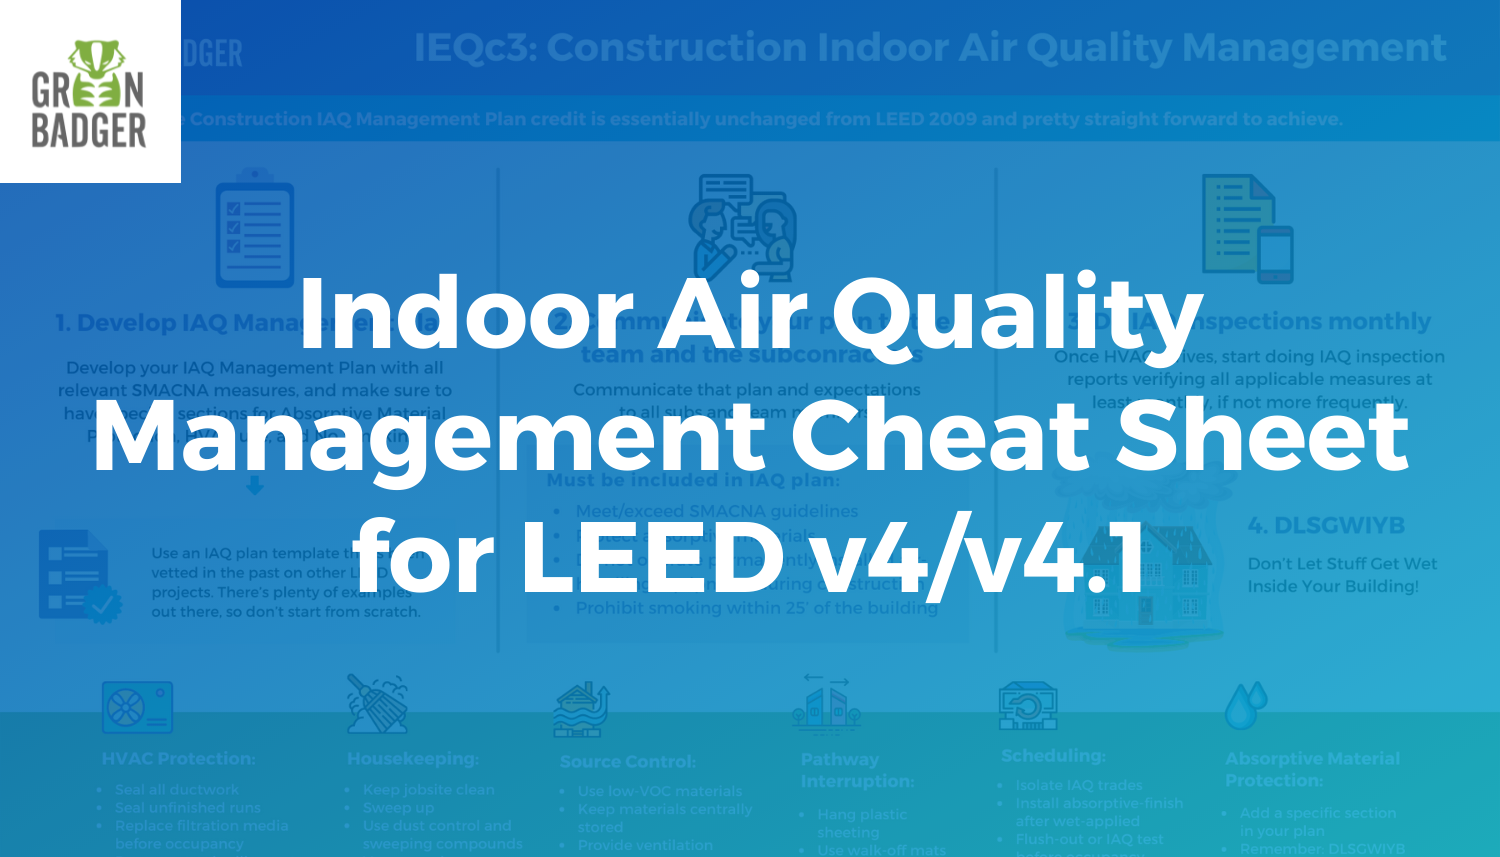 Indoor Air Quality Management Cheat Sheet